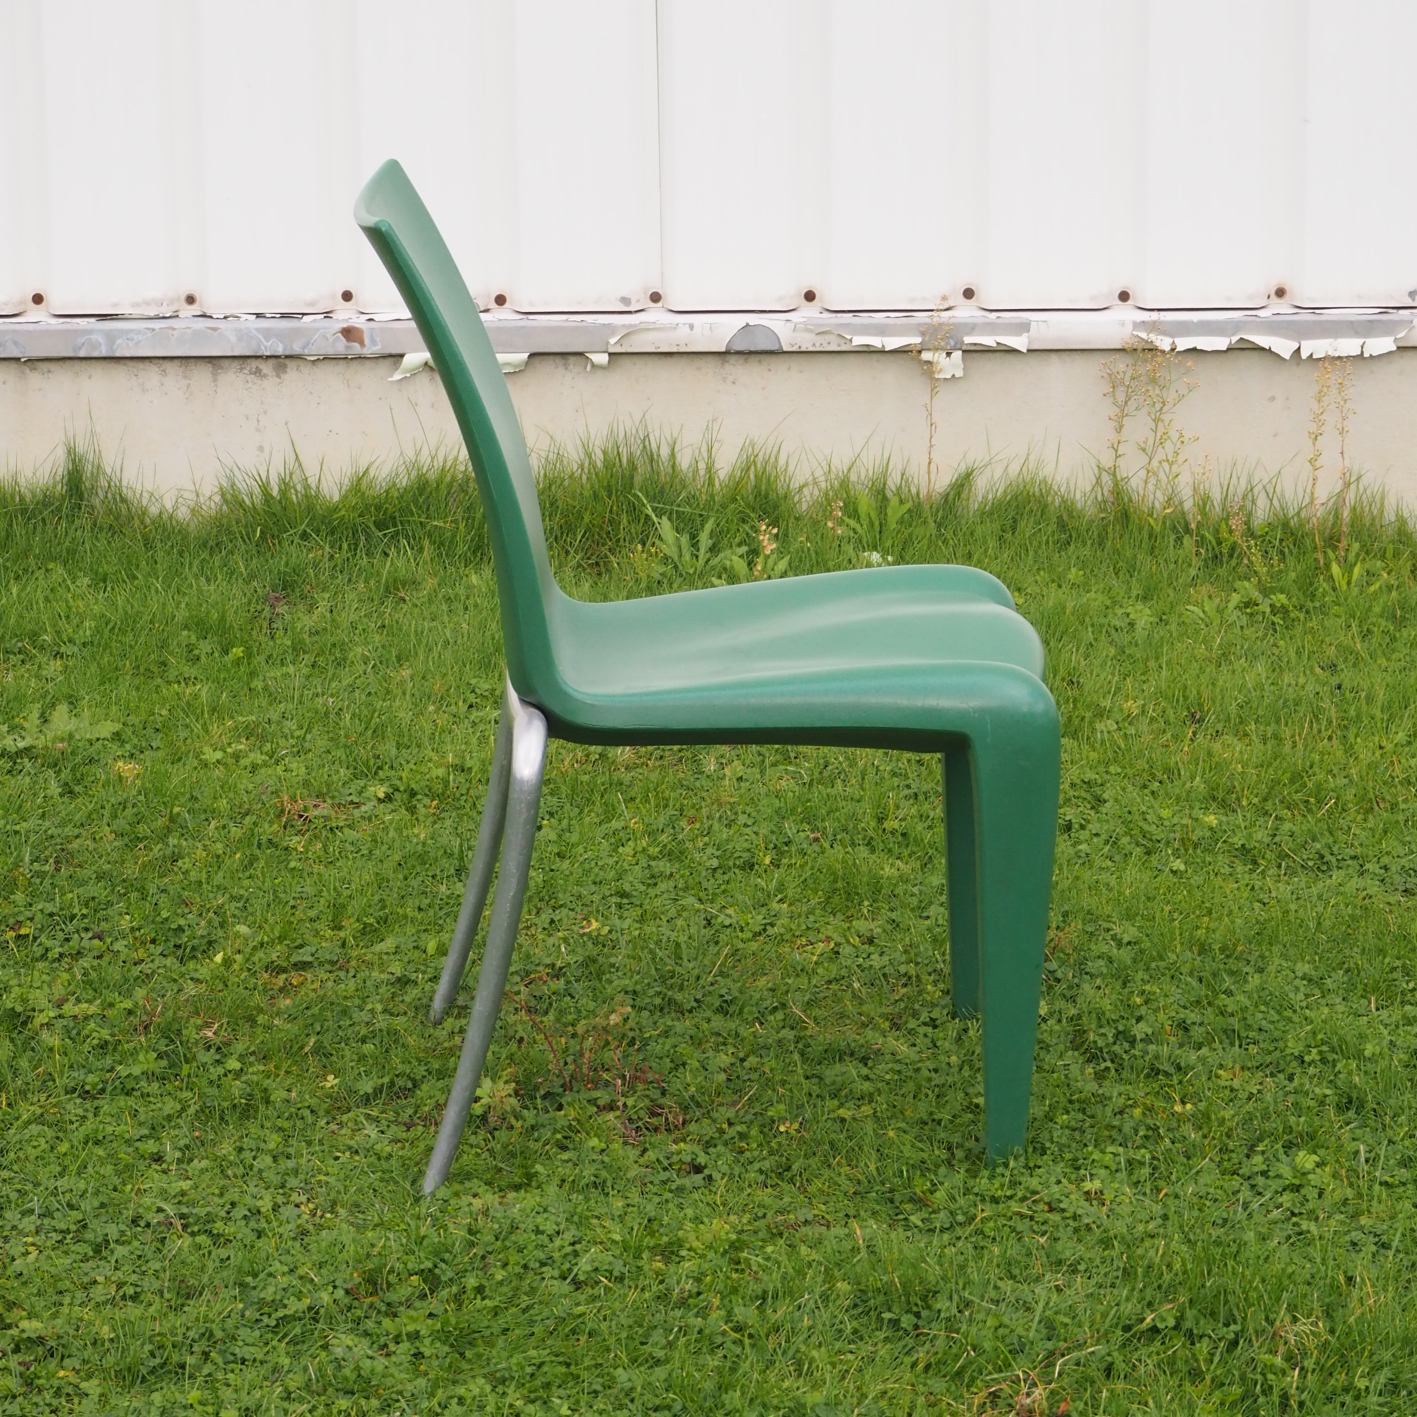 Chair 'Louis 20' by Starck for Vitra (ca. 1990)